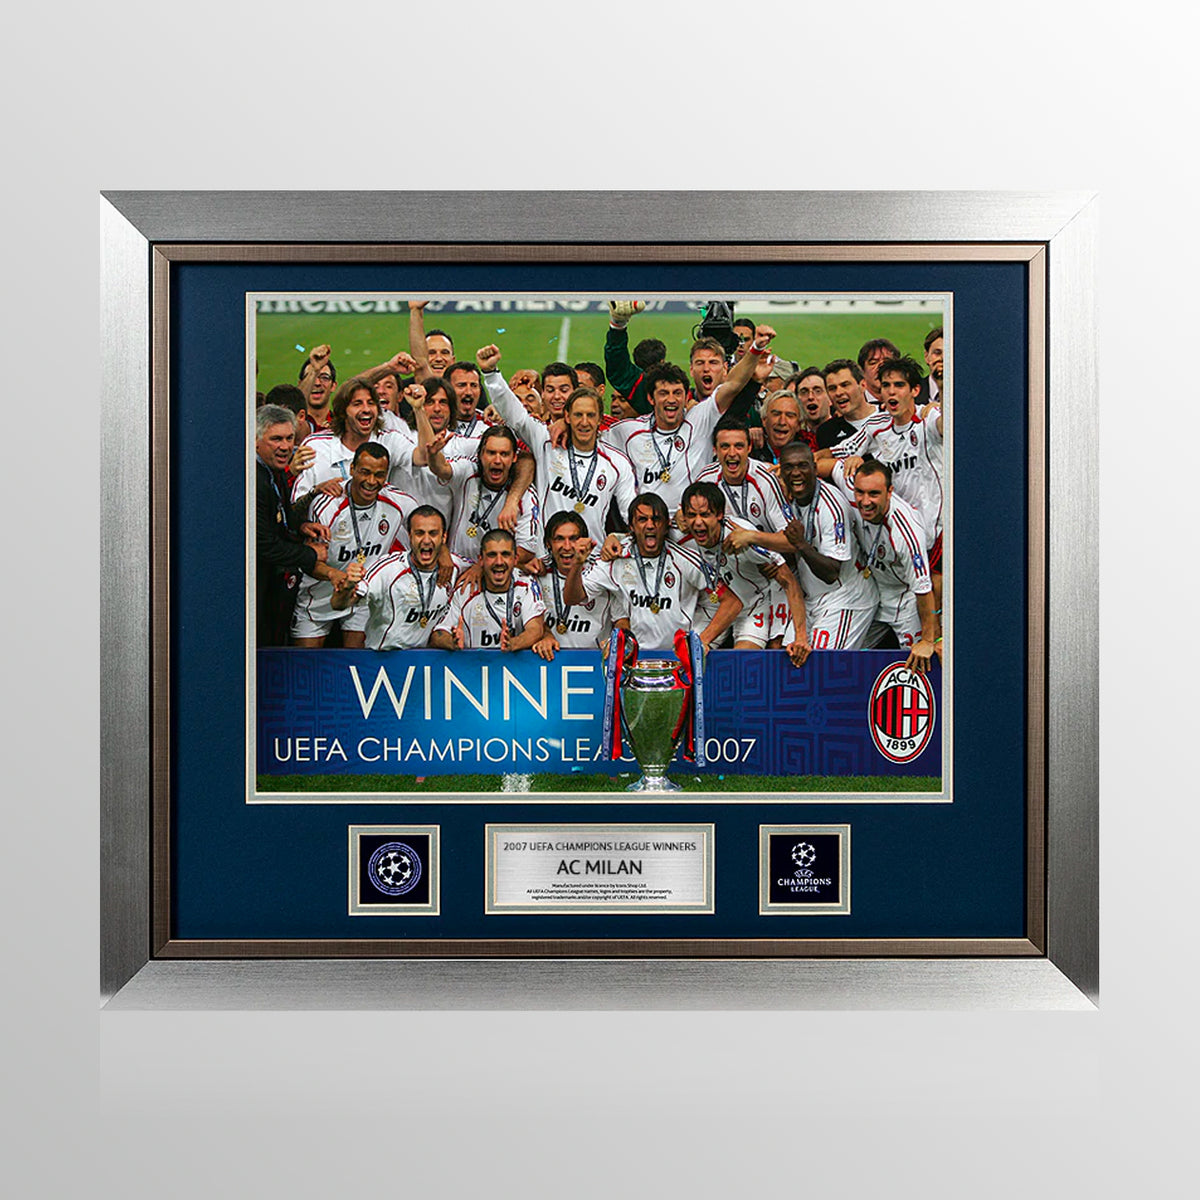 UNSIGNED AC Milan Official UEFA Champions League Framed Photo: 2007 Winners UEFA Club Competitions Online Store